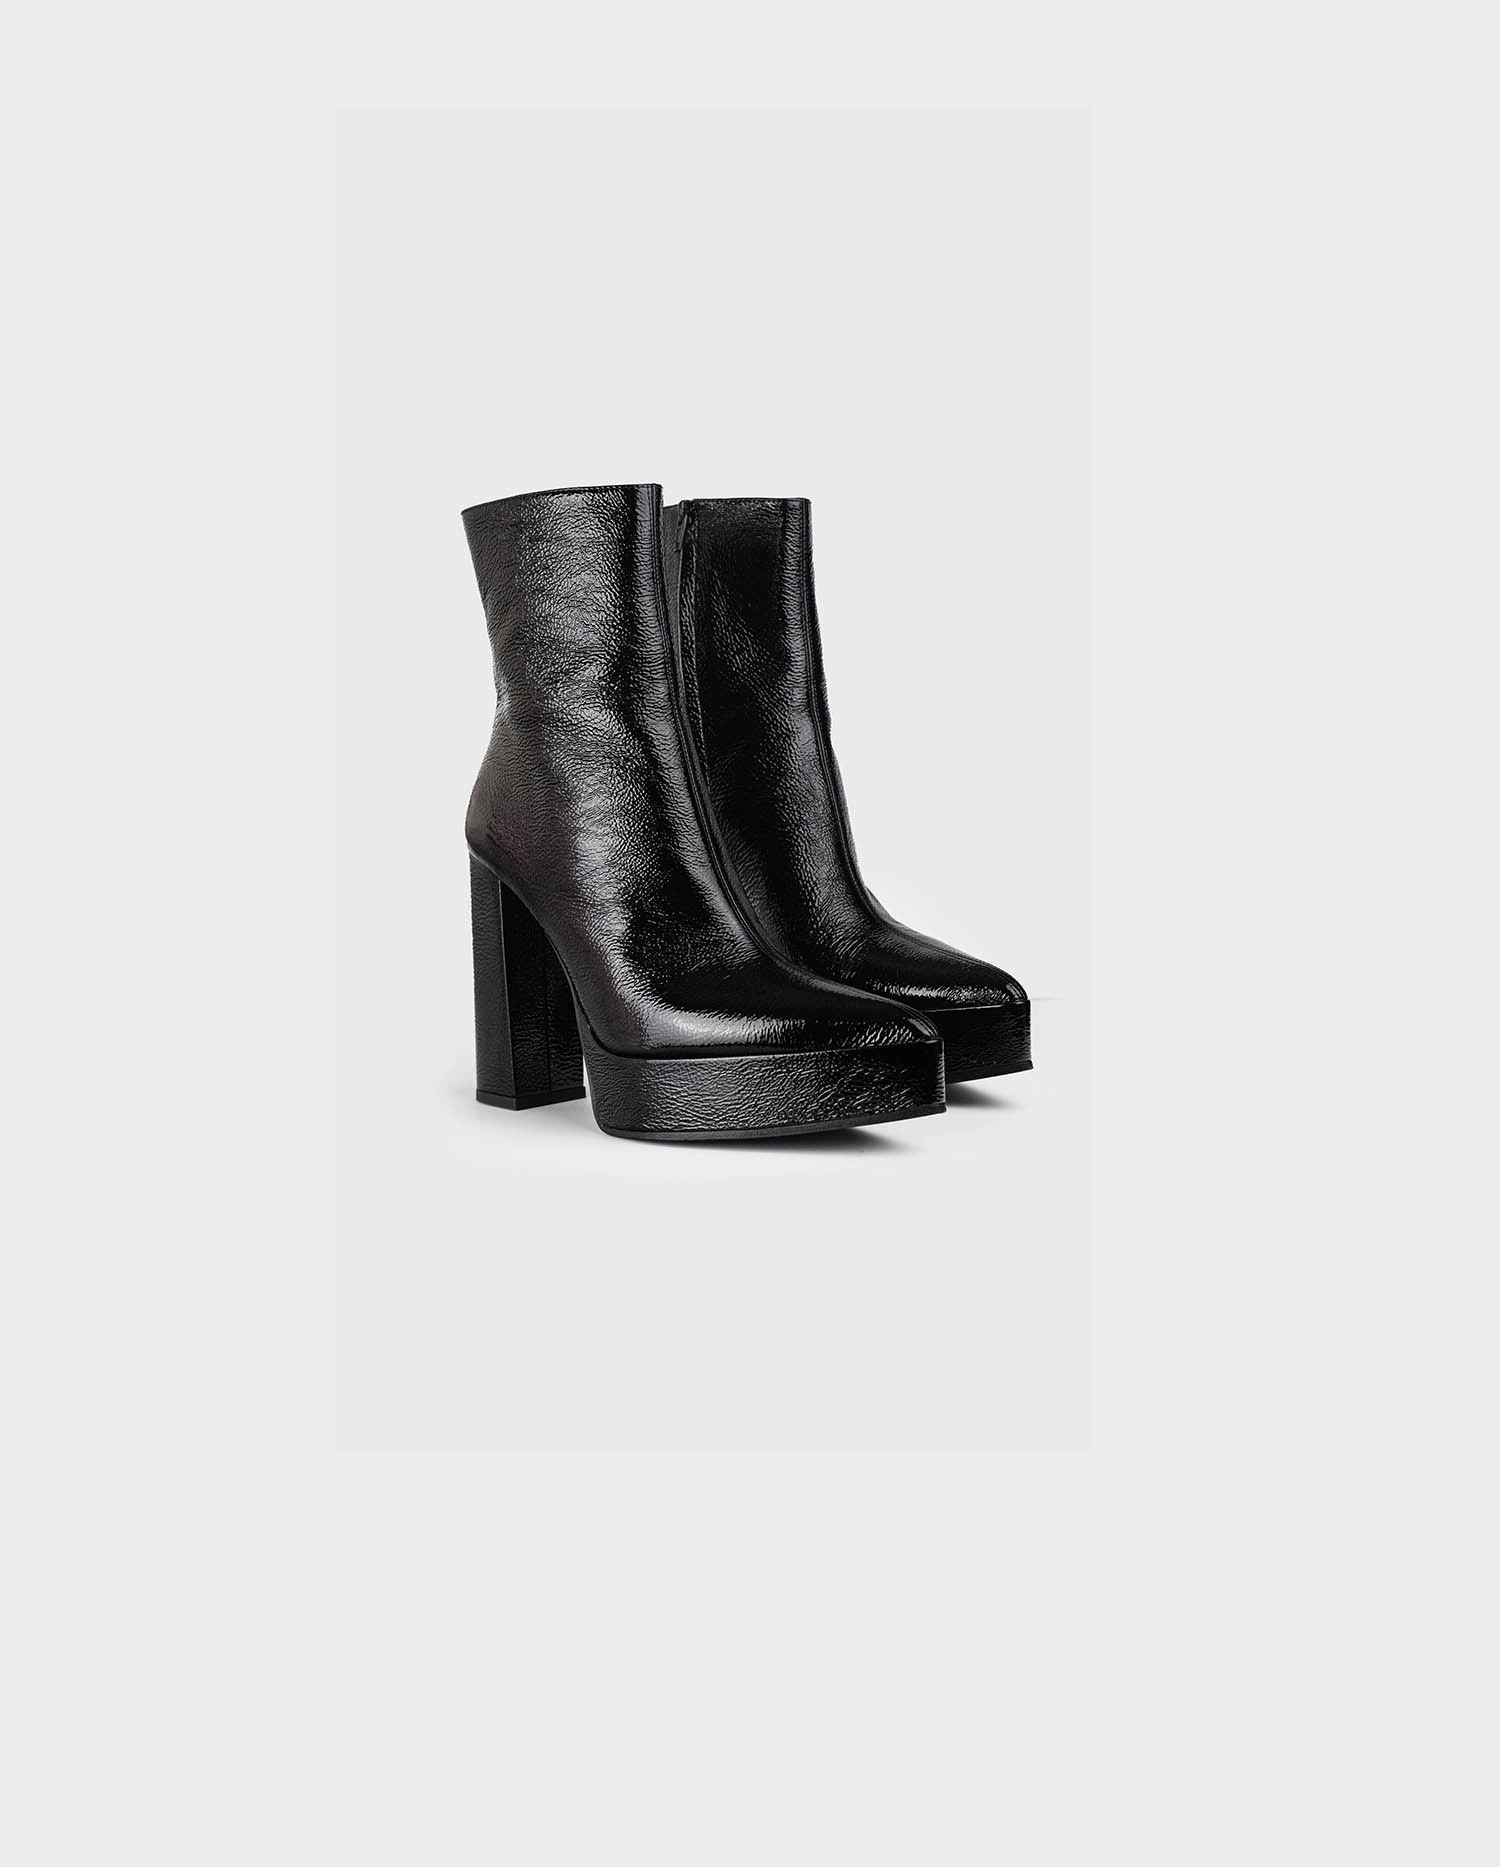 Discover the ADEN Patent Leather Platform Boot